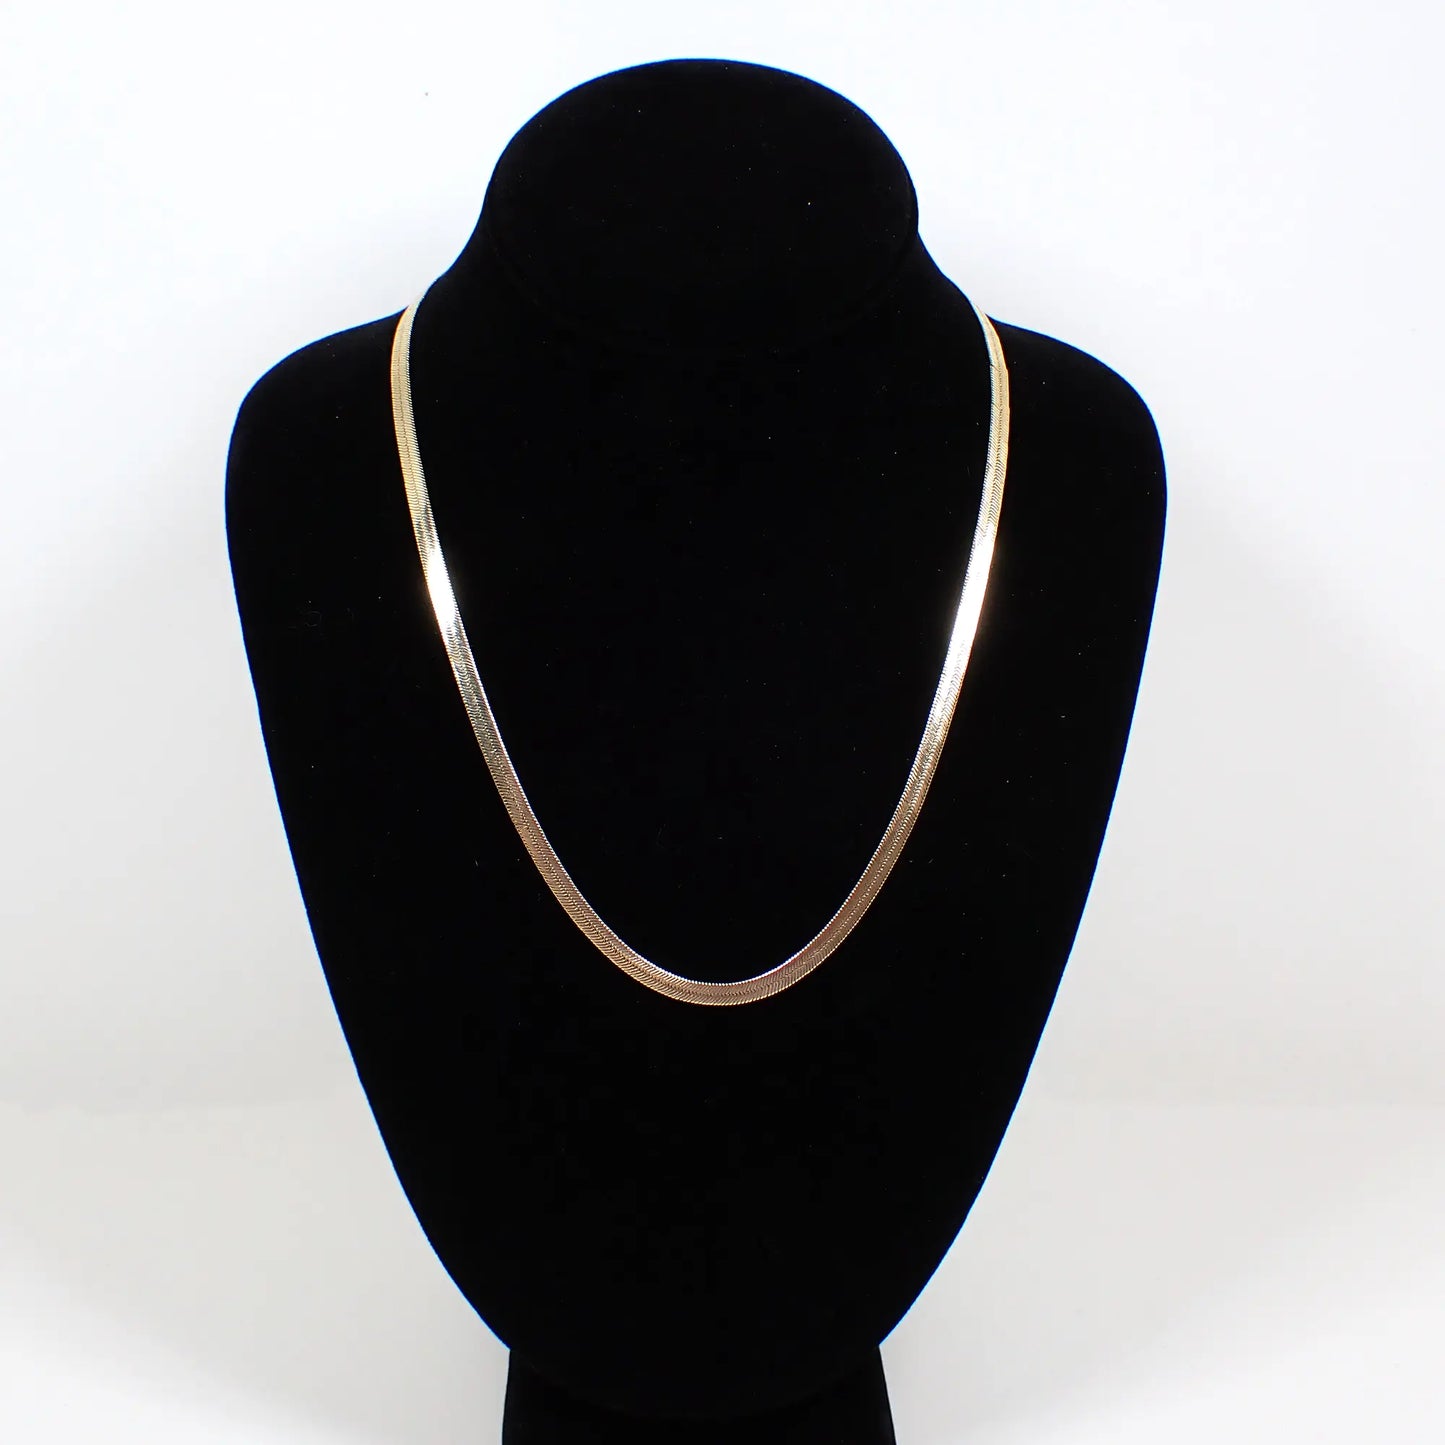 1990s Gold Tone Vintage Herringbone Chain Necklace with Lobster Clasp